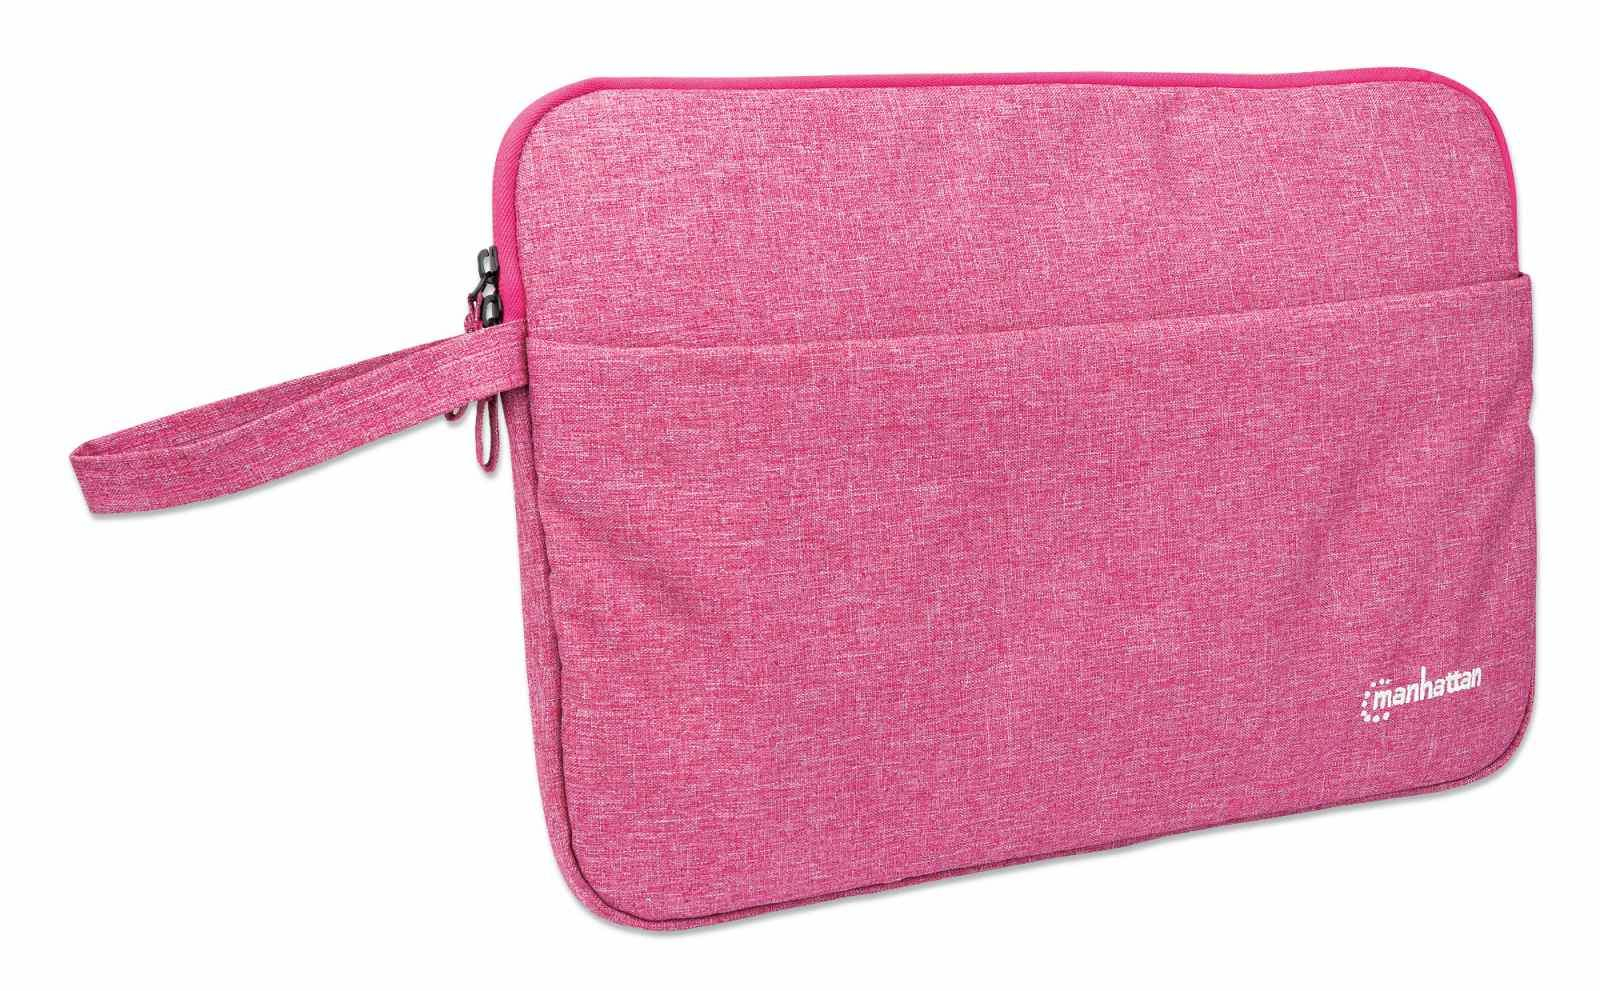 Manhattan Seattle Laptop Sleeve 14.5", Coral, Padded, Extra Soft Internal Cushioning, Main Compartment with double zips, Zippered Front Pocket, Carry Loop, Water Resistant and Durable